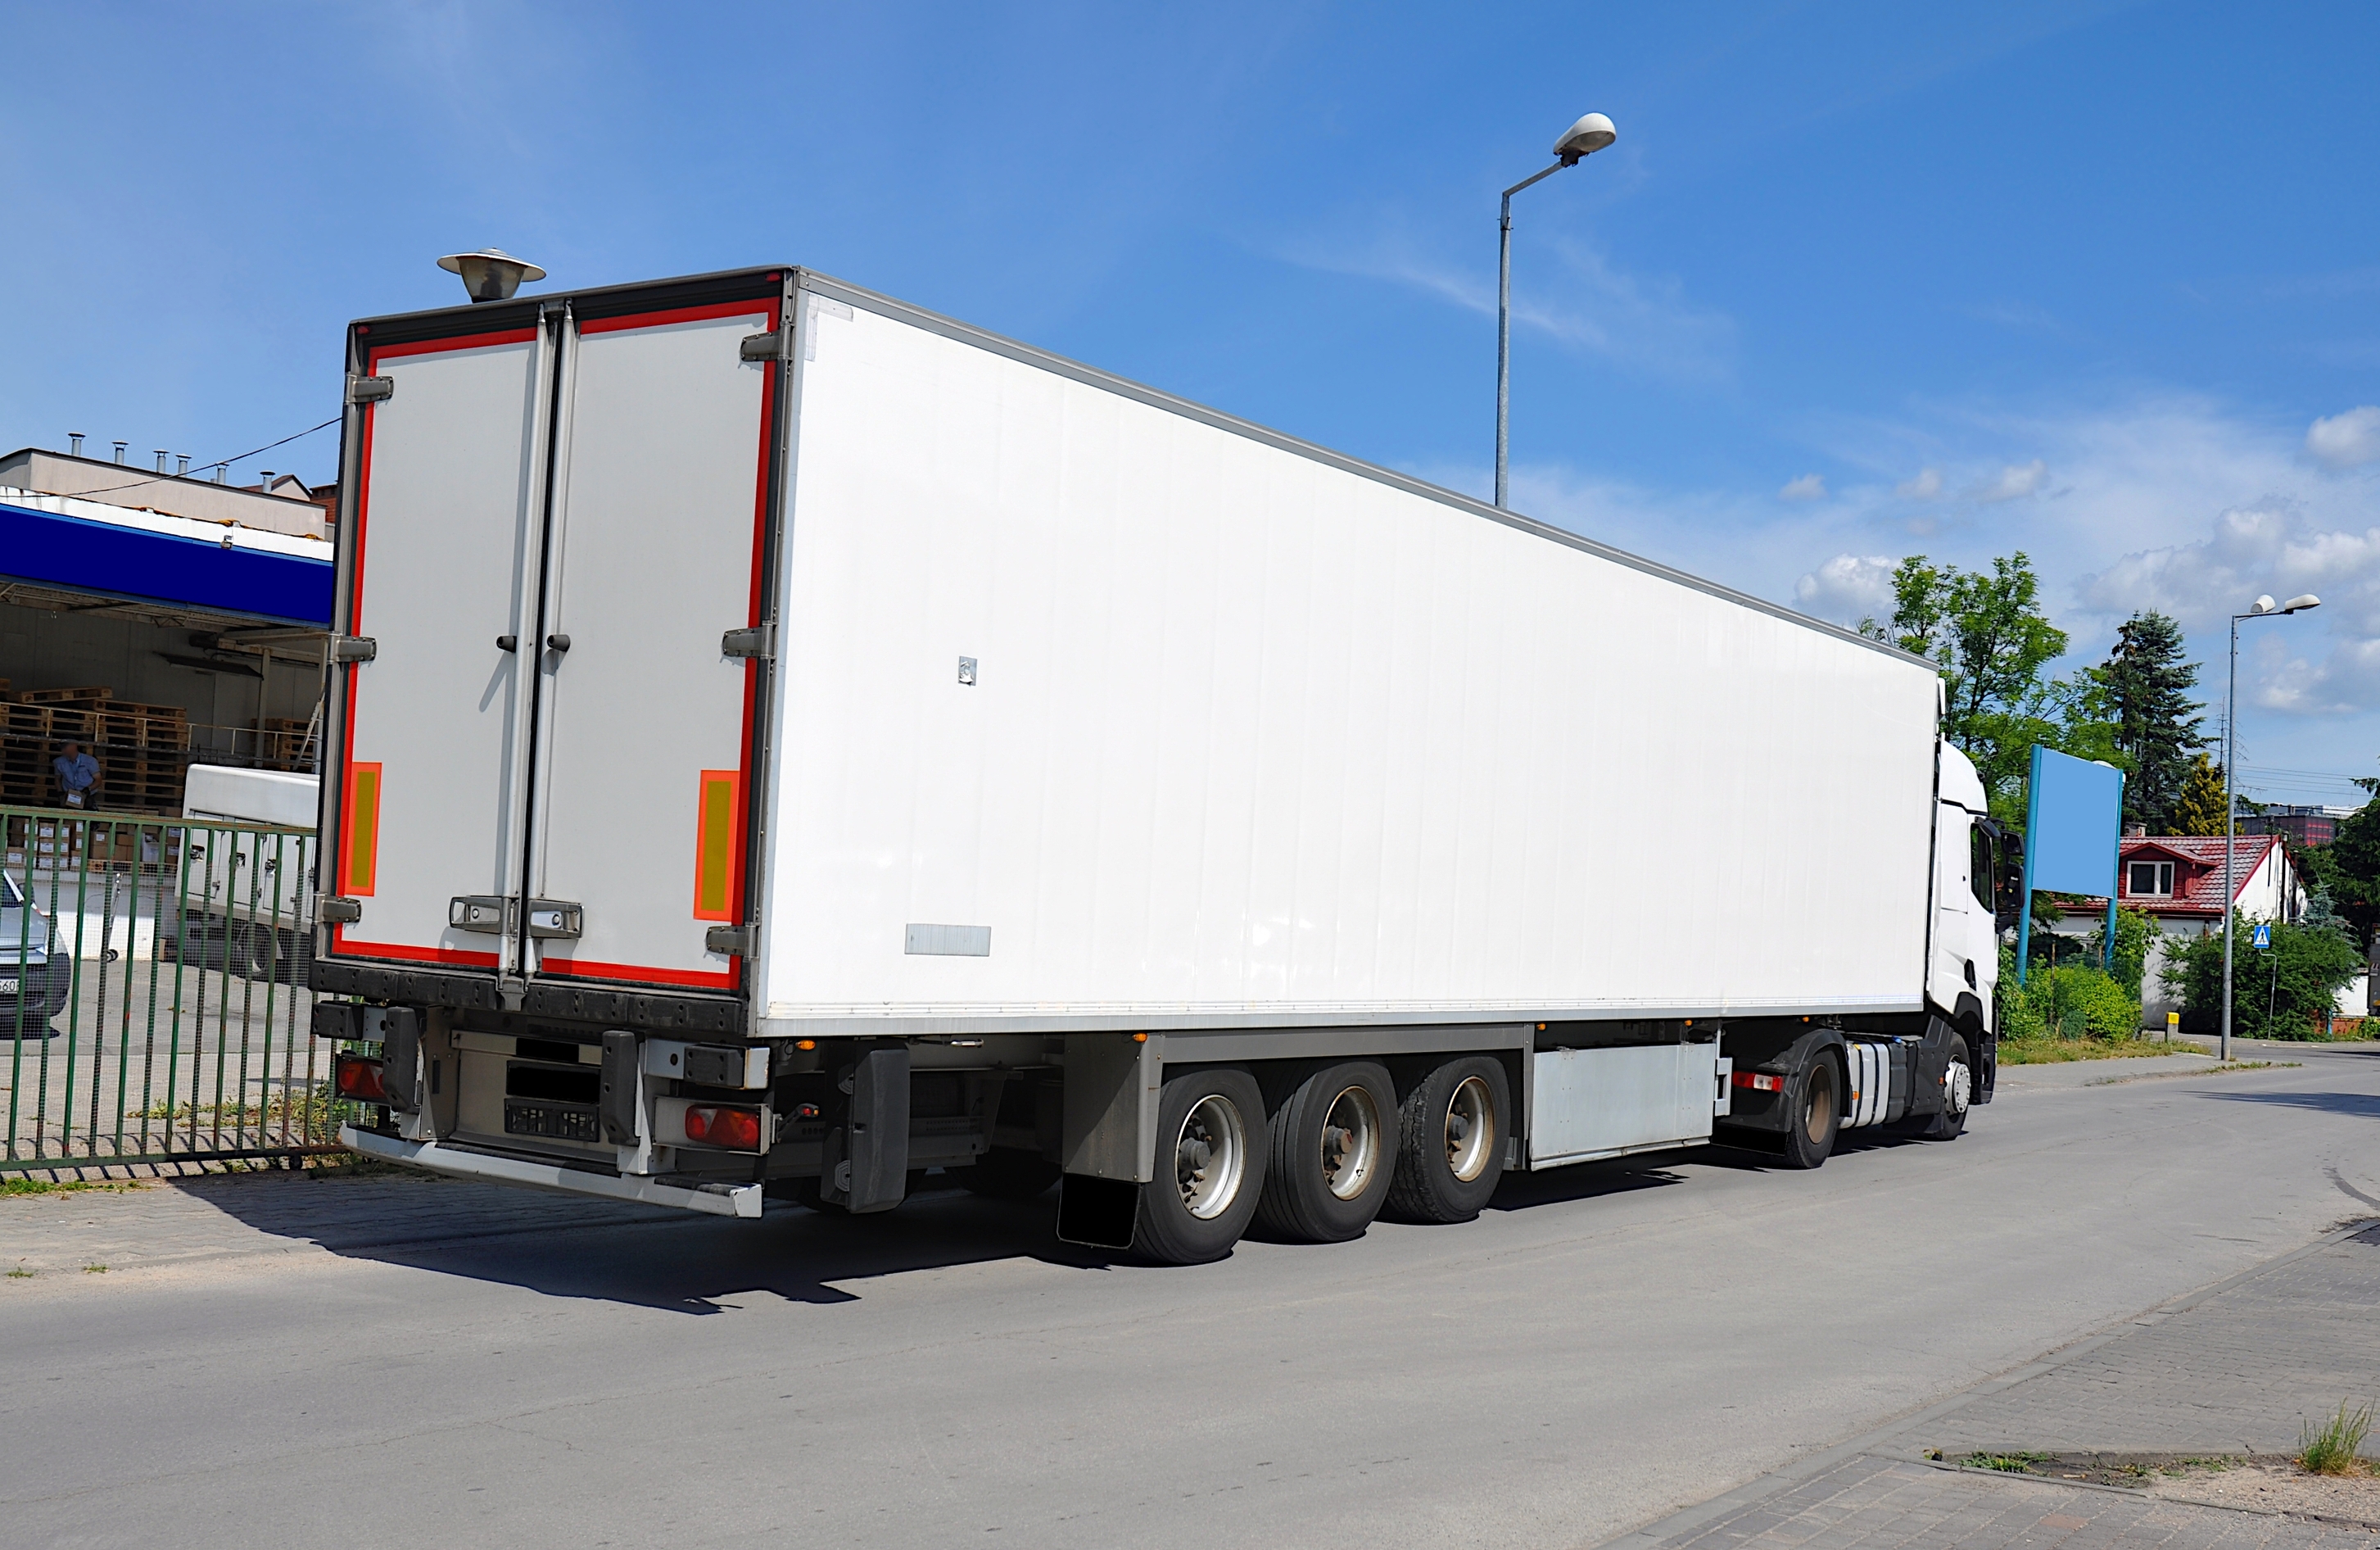 Delivery truck parked by the building. | Source: Shutterstock